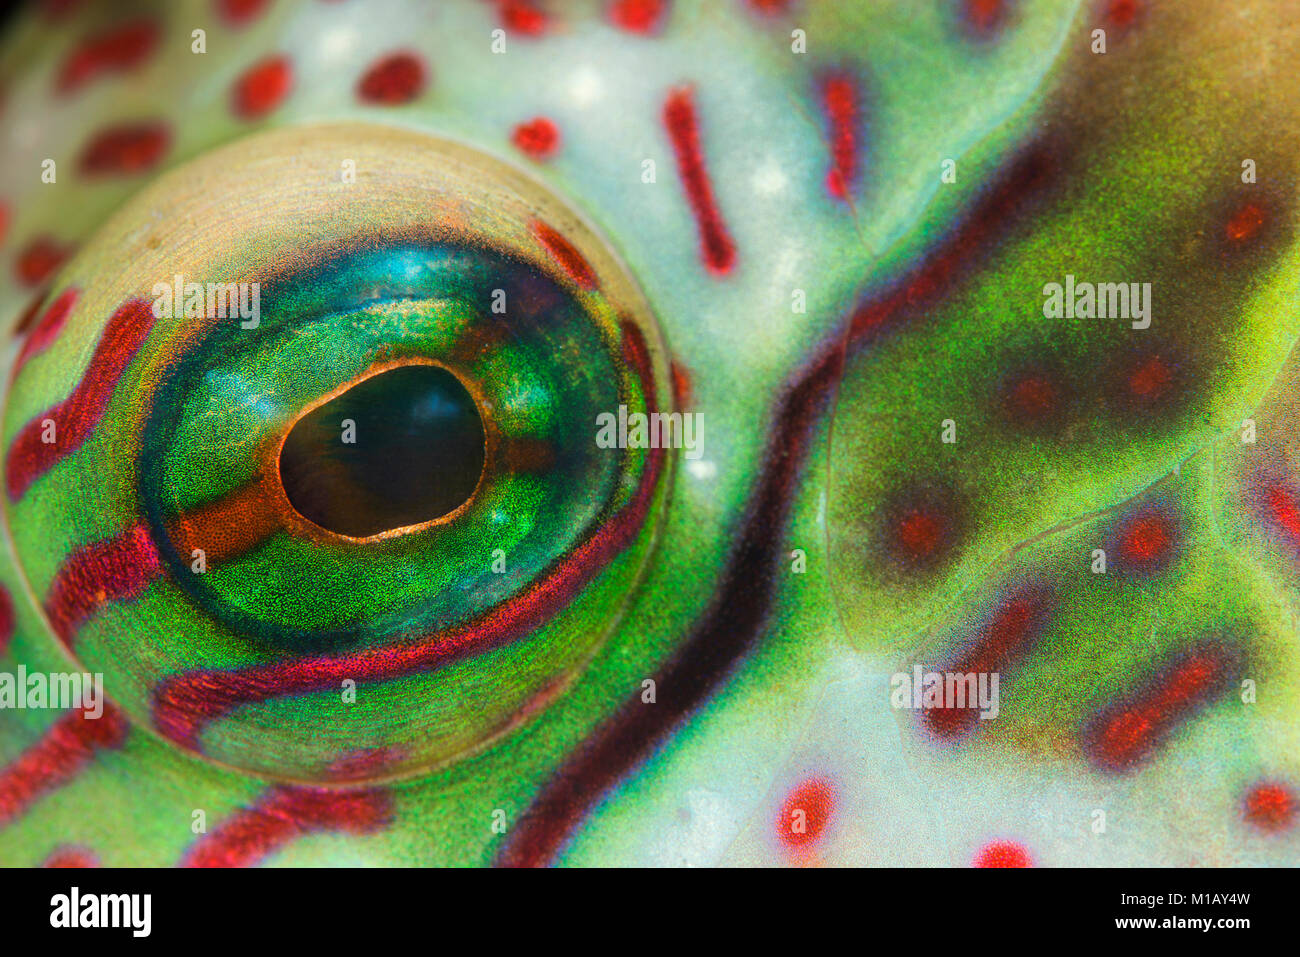 Close-up, abstract underwater photo of the eye and colourful body pattern of a Tripletail Wrasse fish in Komodo National Park, Indonesia. Stock Photo